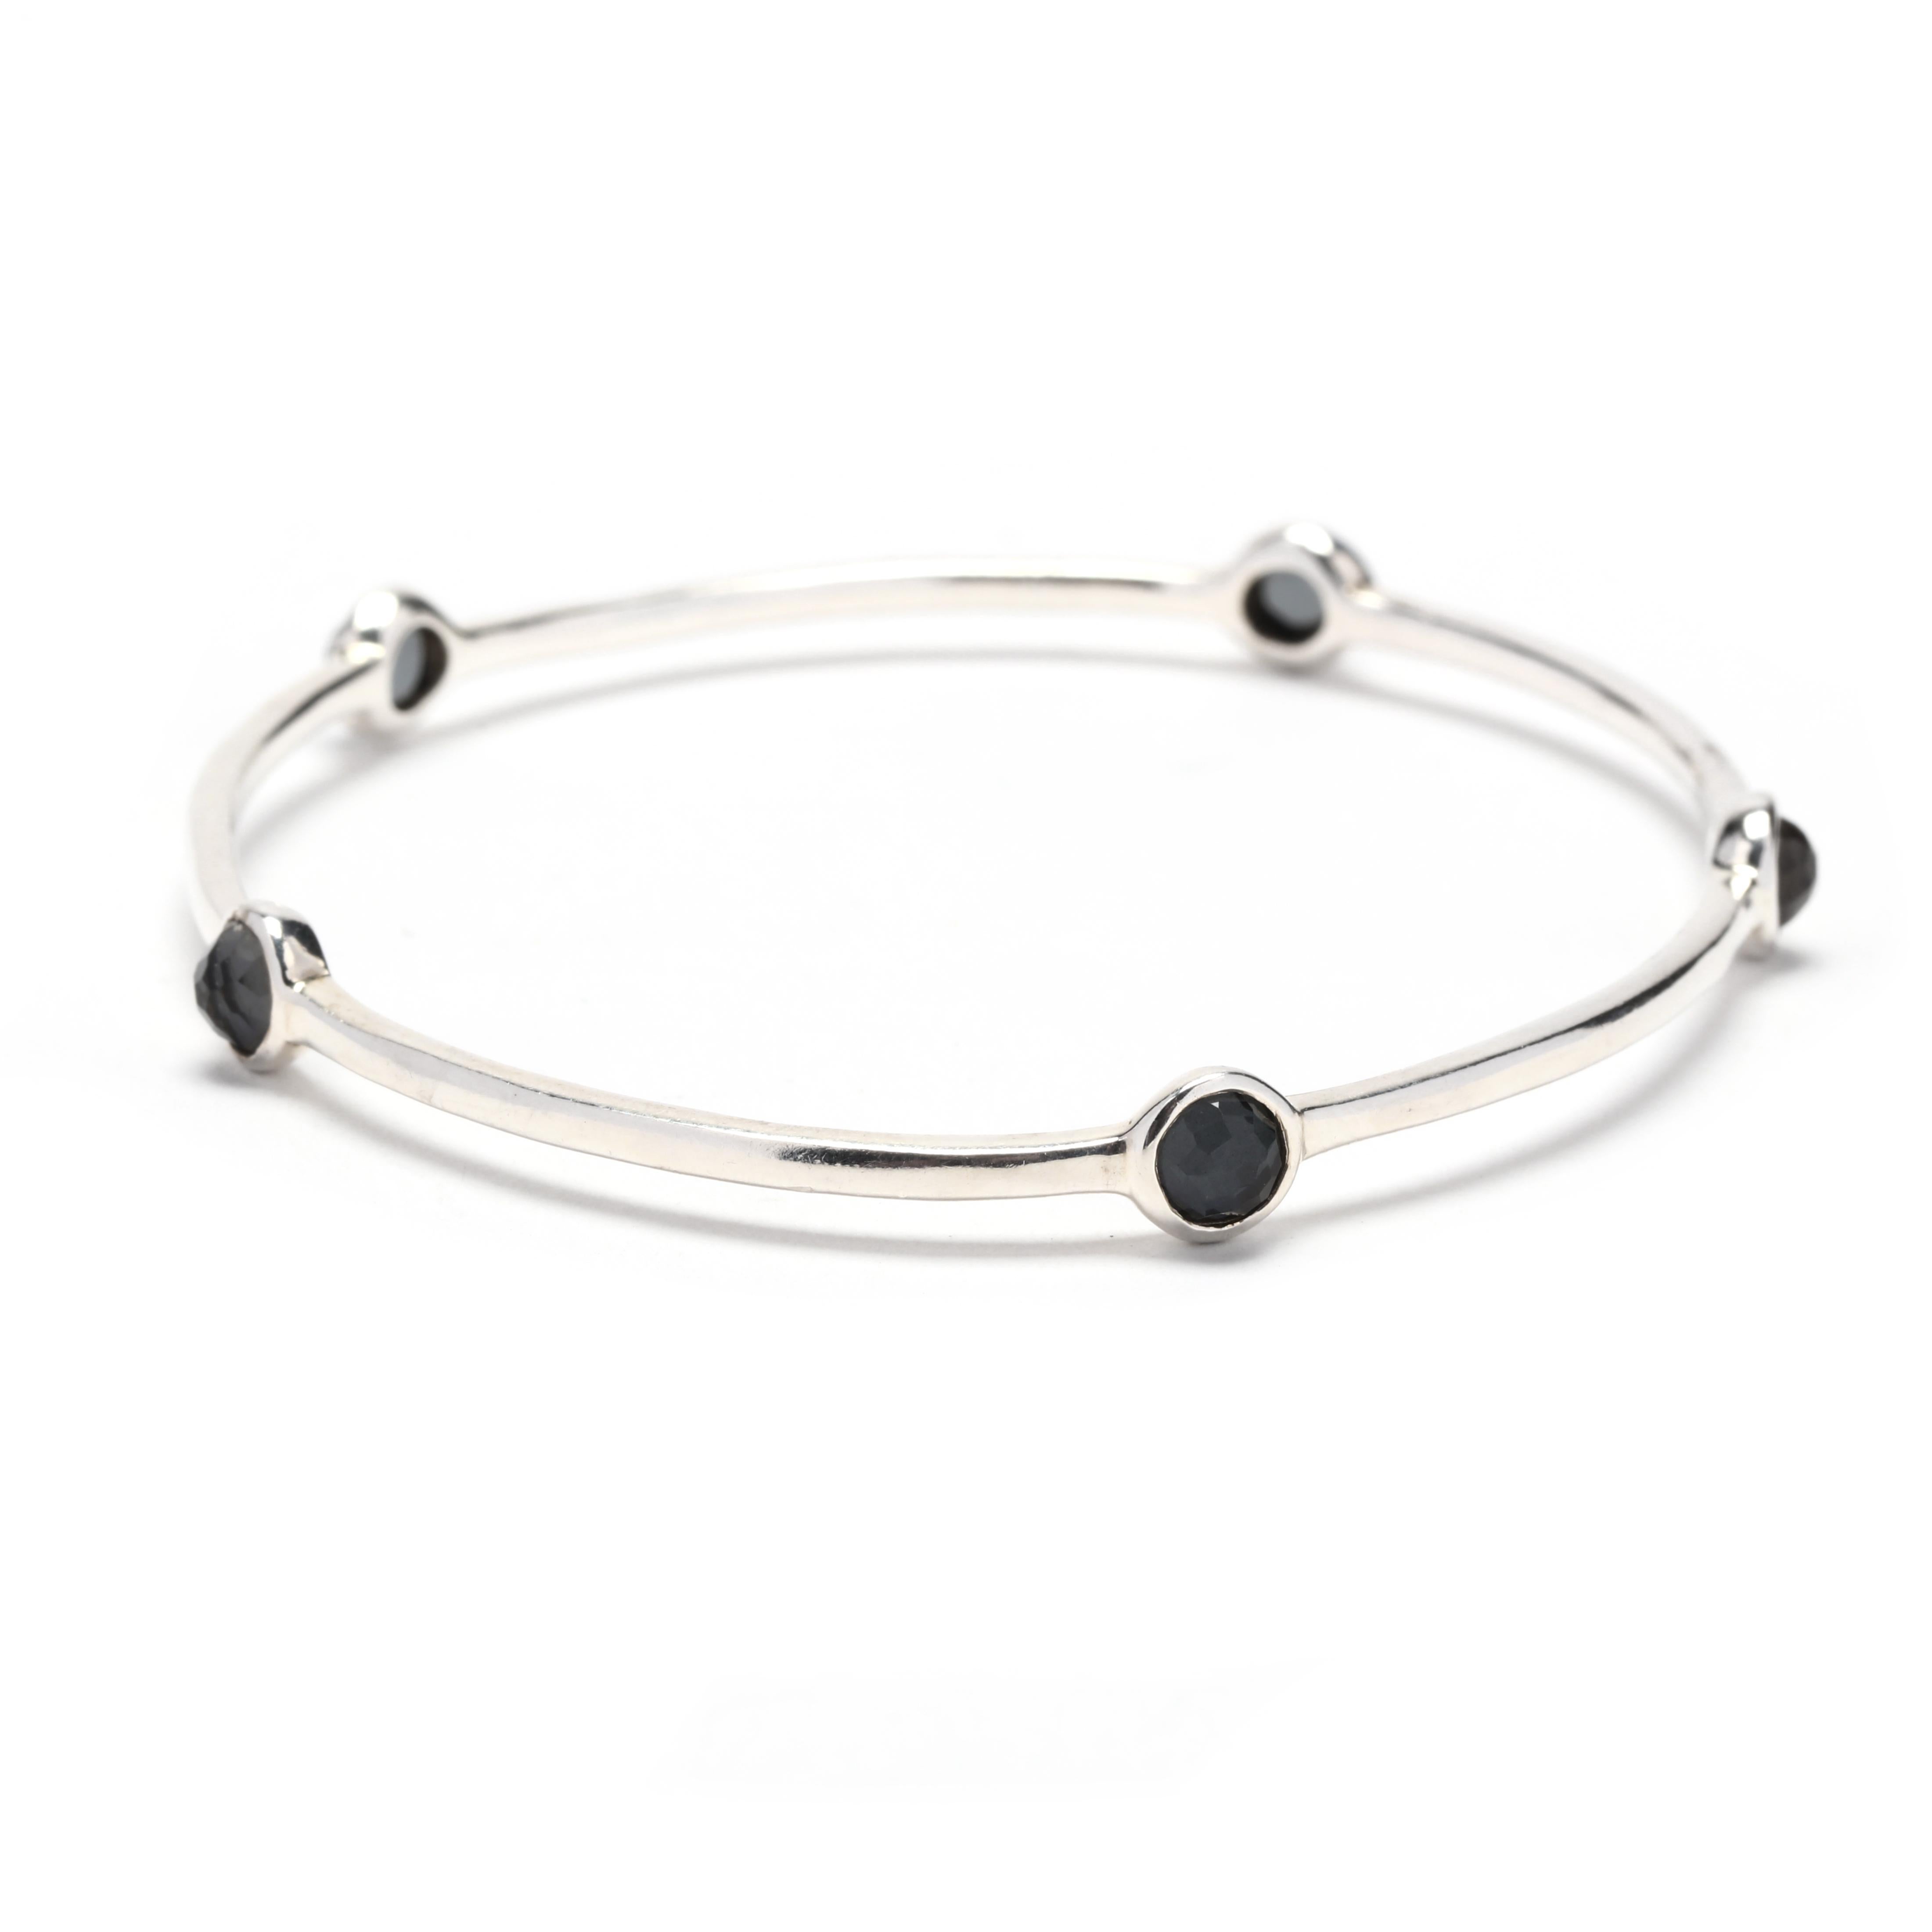 This beautiful and unique Ippolita Rock Candy Hematite 5 Stone Bangle Bracelet is handcrafted with sterling silver and features five stunning hematite stones. The dark, metallic gray stones add a sophisticated and elegant touch to any outfit.